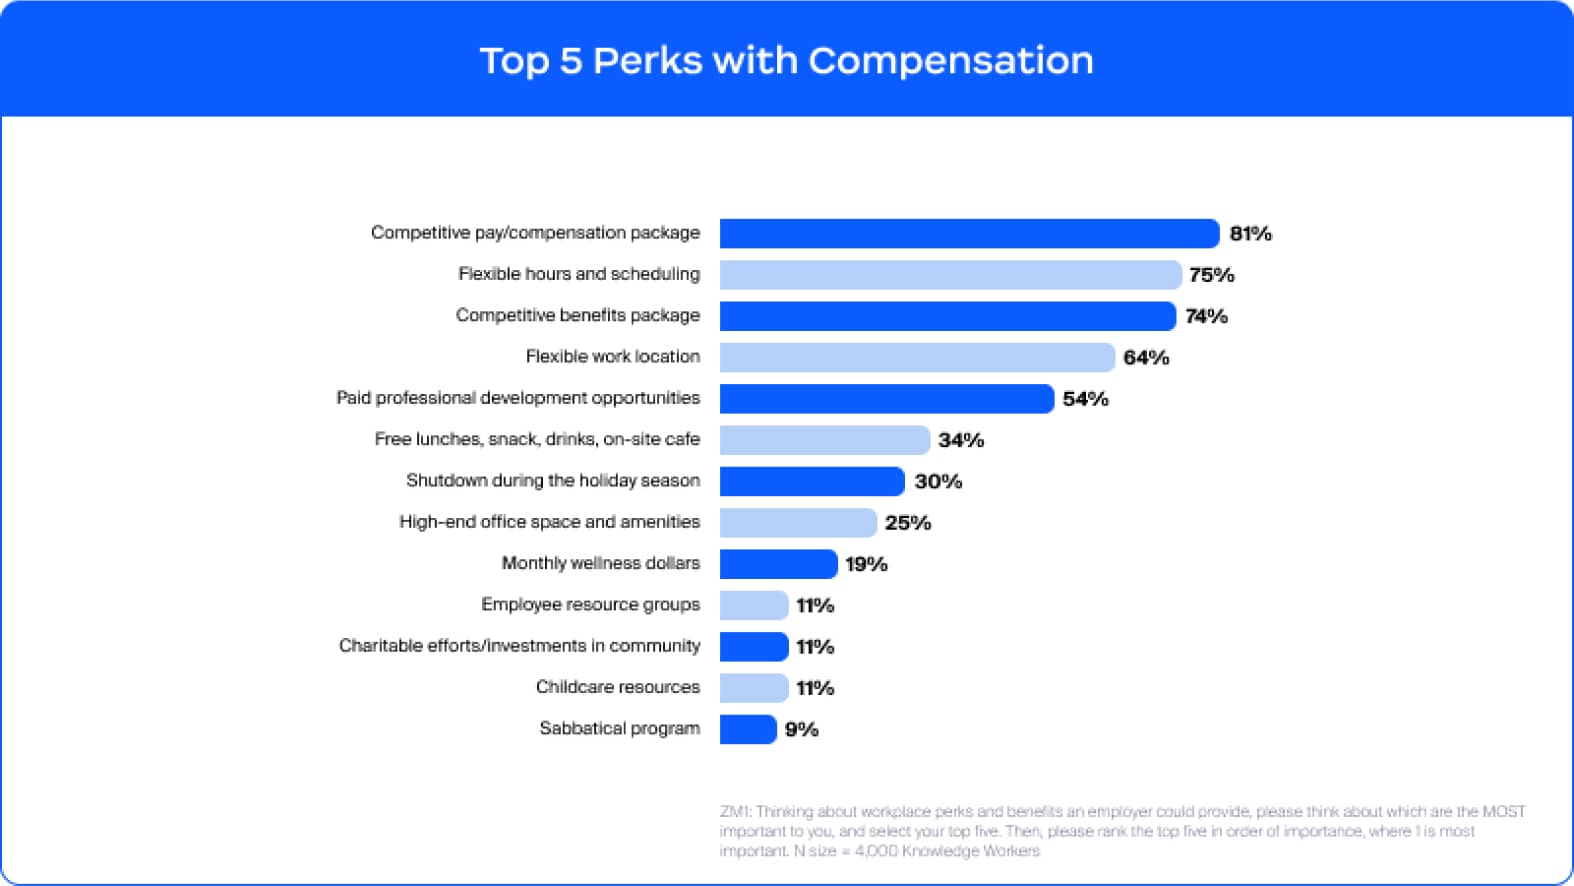 Top 5 Perks with Compensation